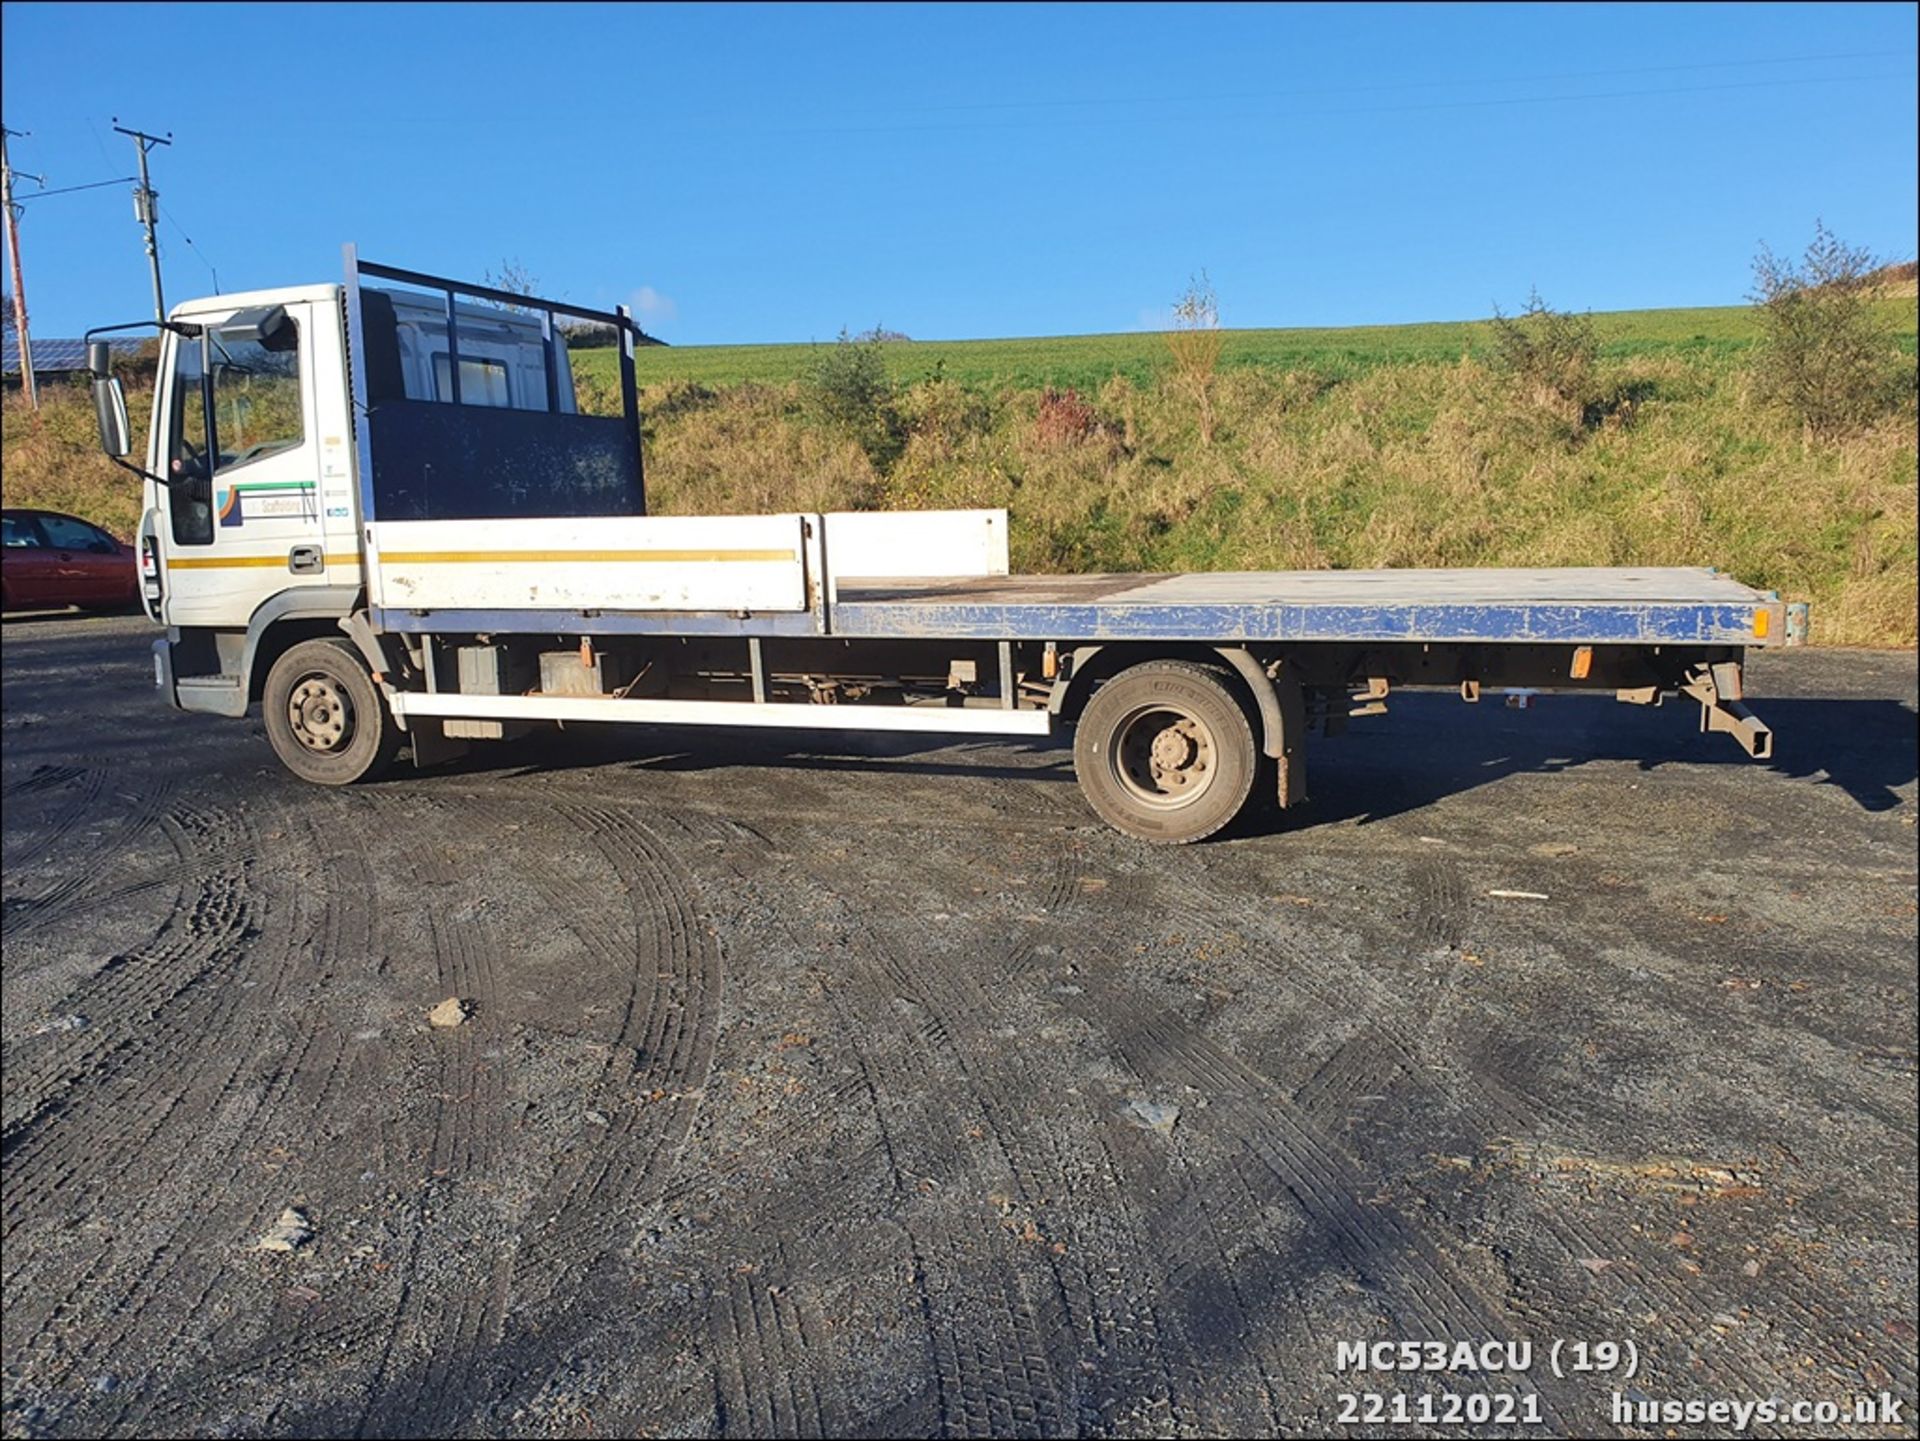 04/53 IVECO-FORD - 3920cc 2dr Flat Bed (White, 178k) - Image 14 of 24